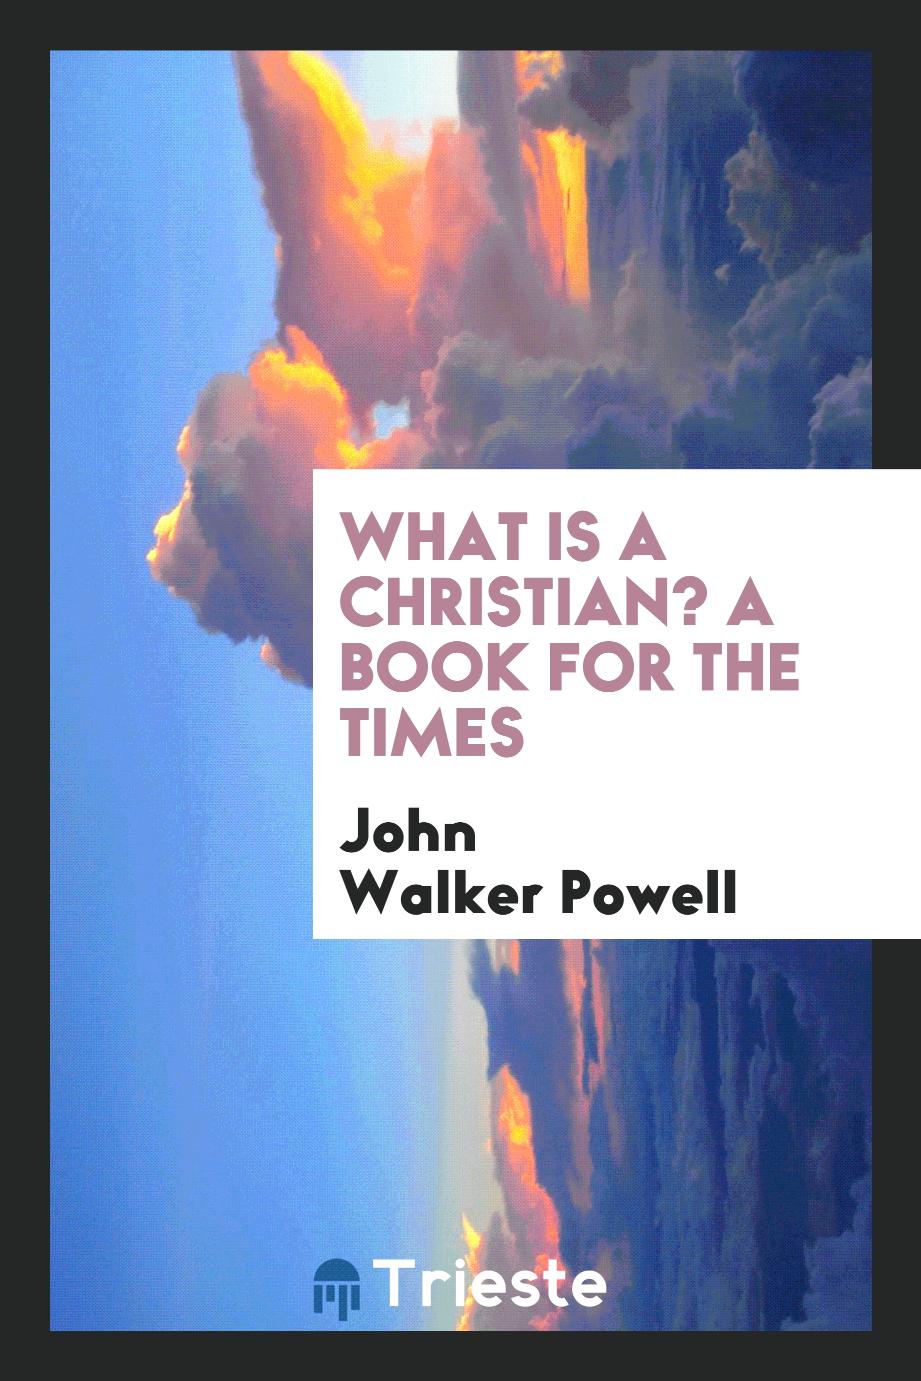 What is a Christian? A book for the times